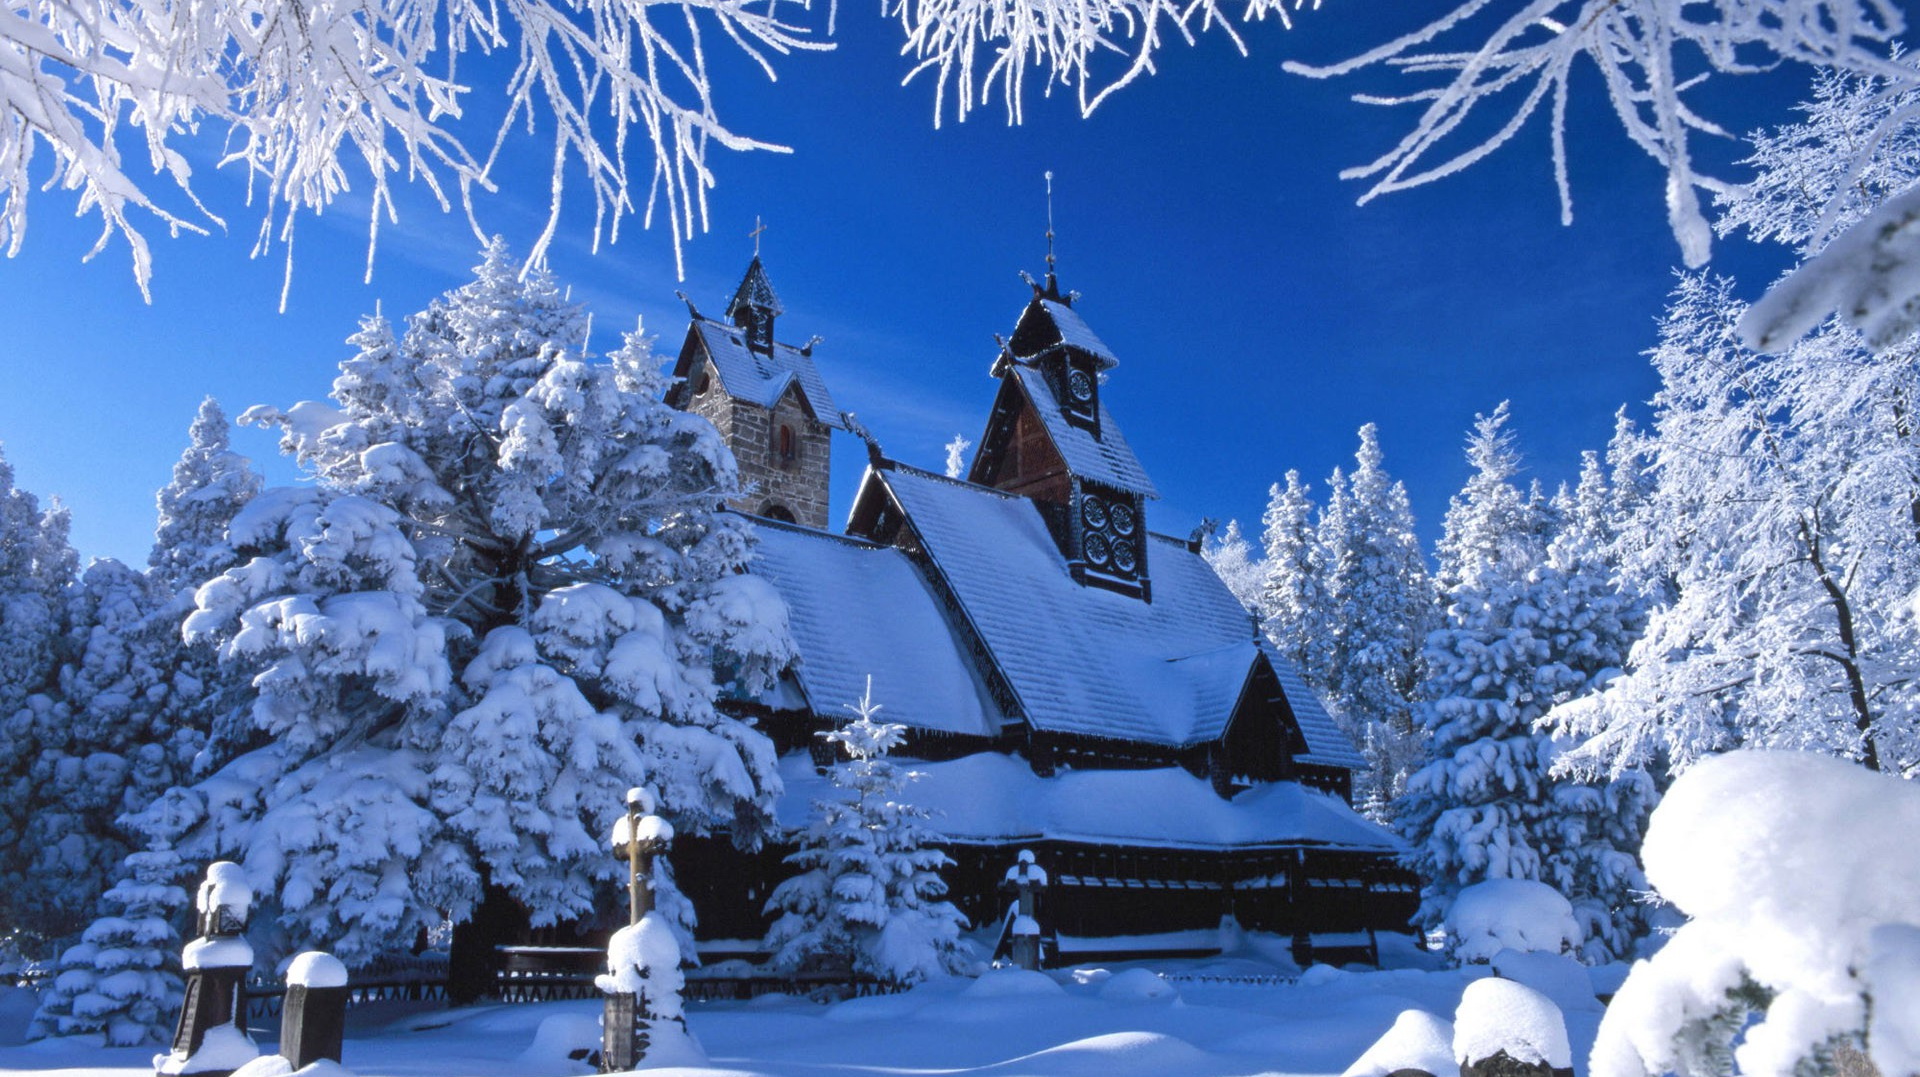 Beautiful Sceneries Of Nature Snow Covered Houses And